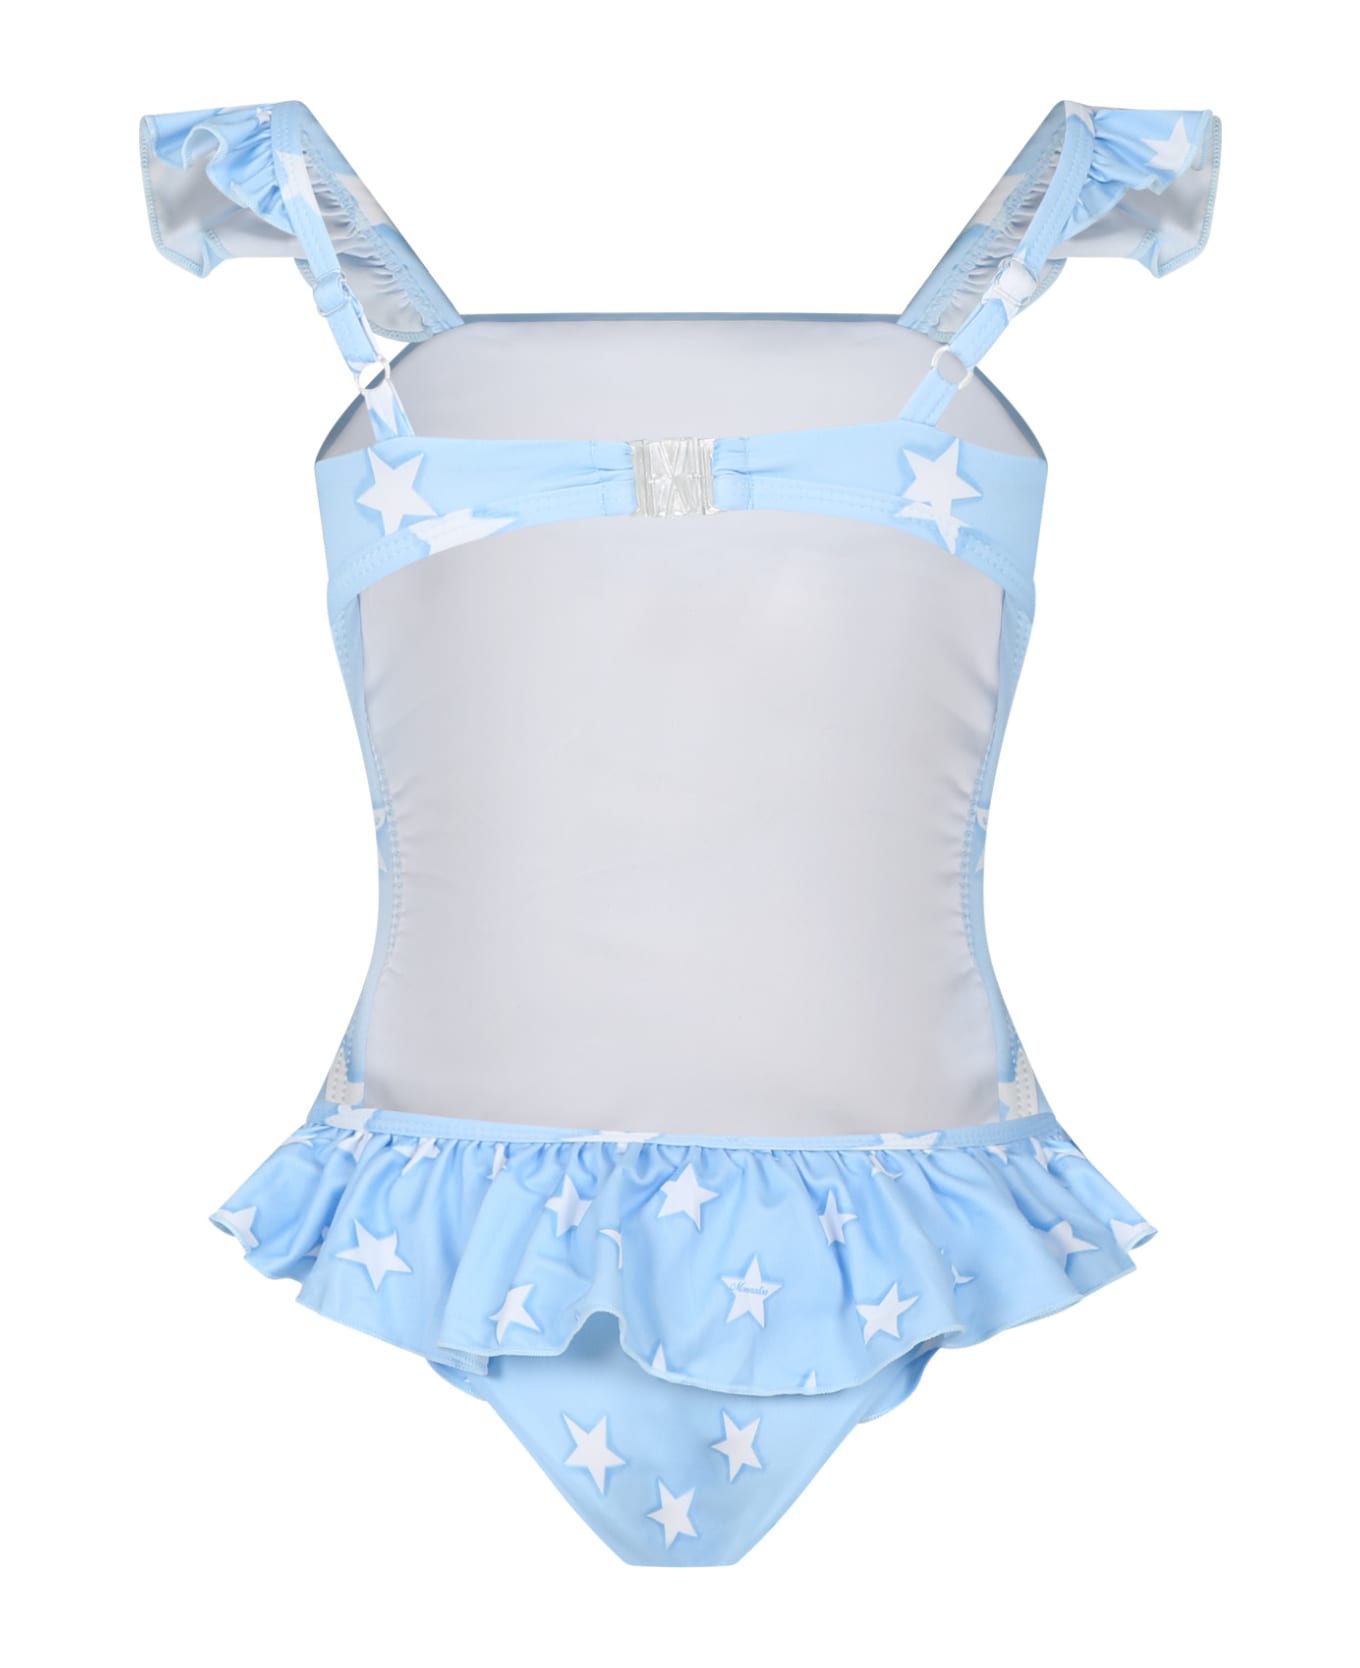 Monnalisa Sky Blue Swimsuit For Baby Girl With Minnie - Light Blue